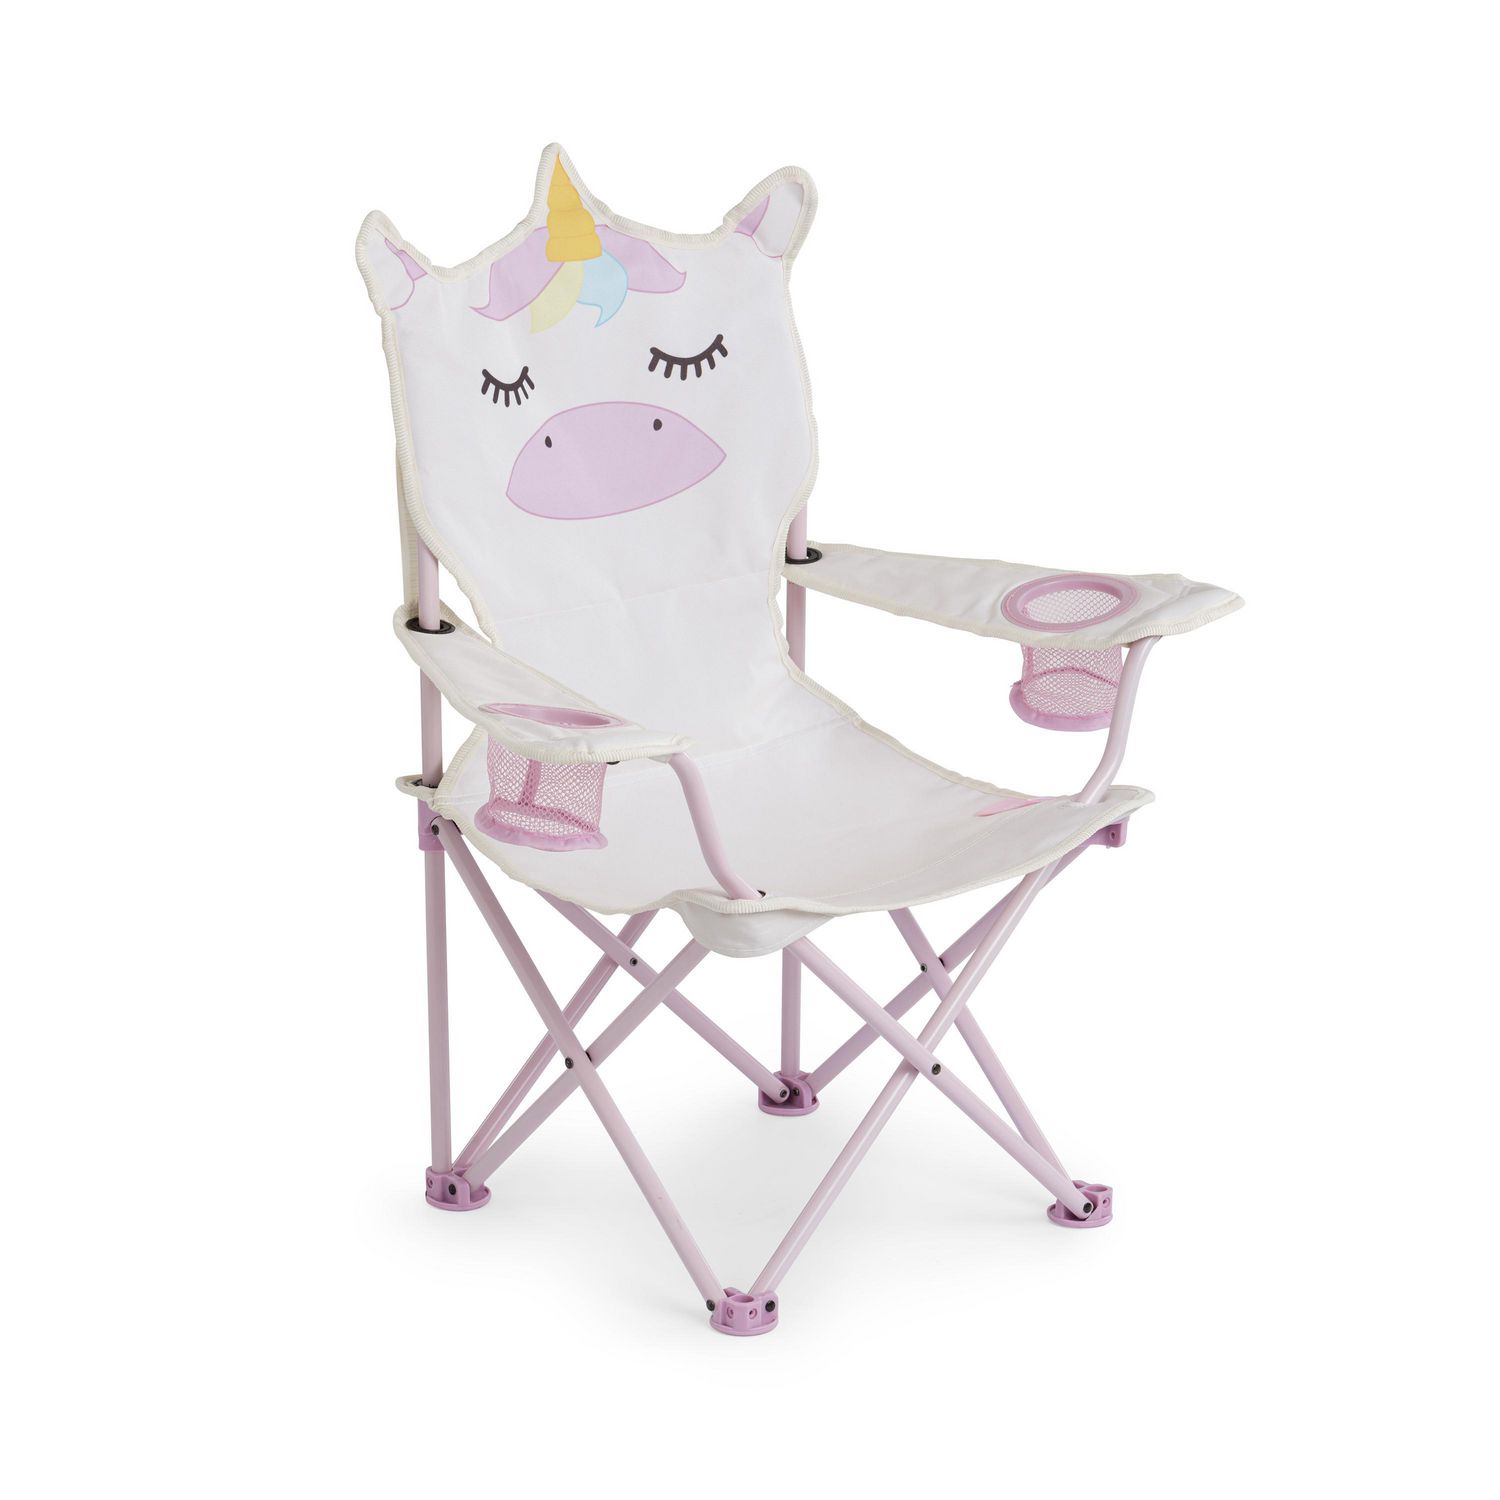 Firefly Outdoor Gear Sparkle The Unicorn Kid S Camping Chair Walmart Canada